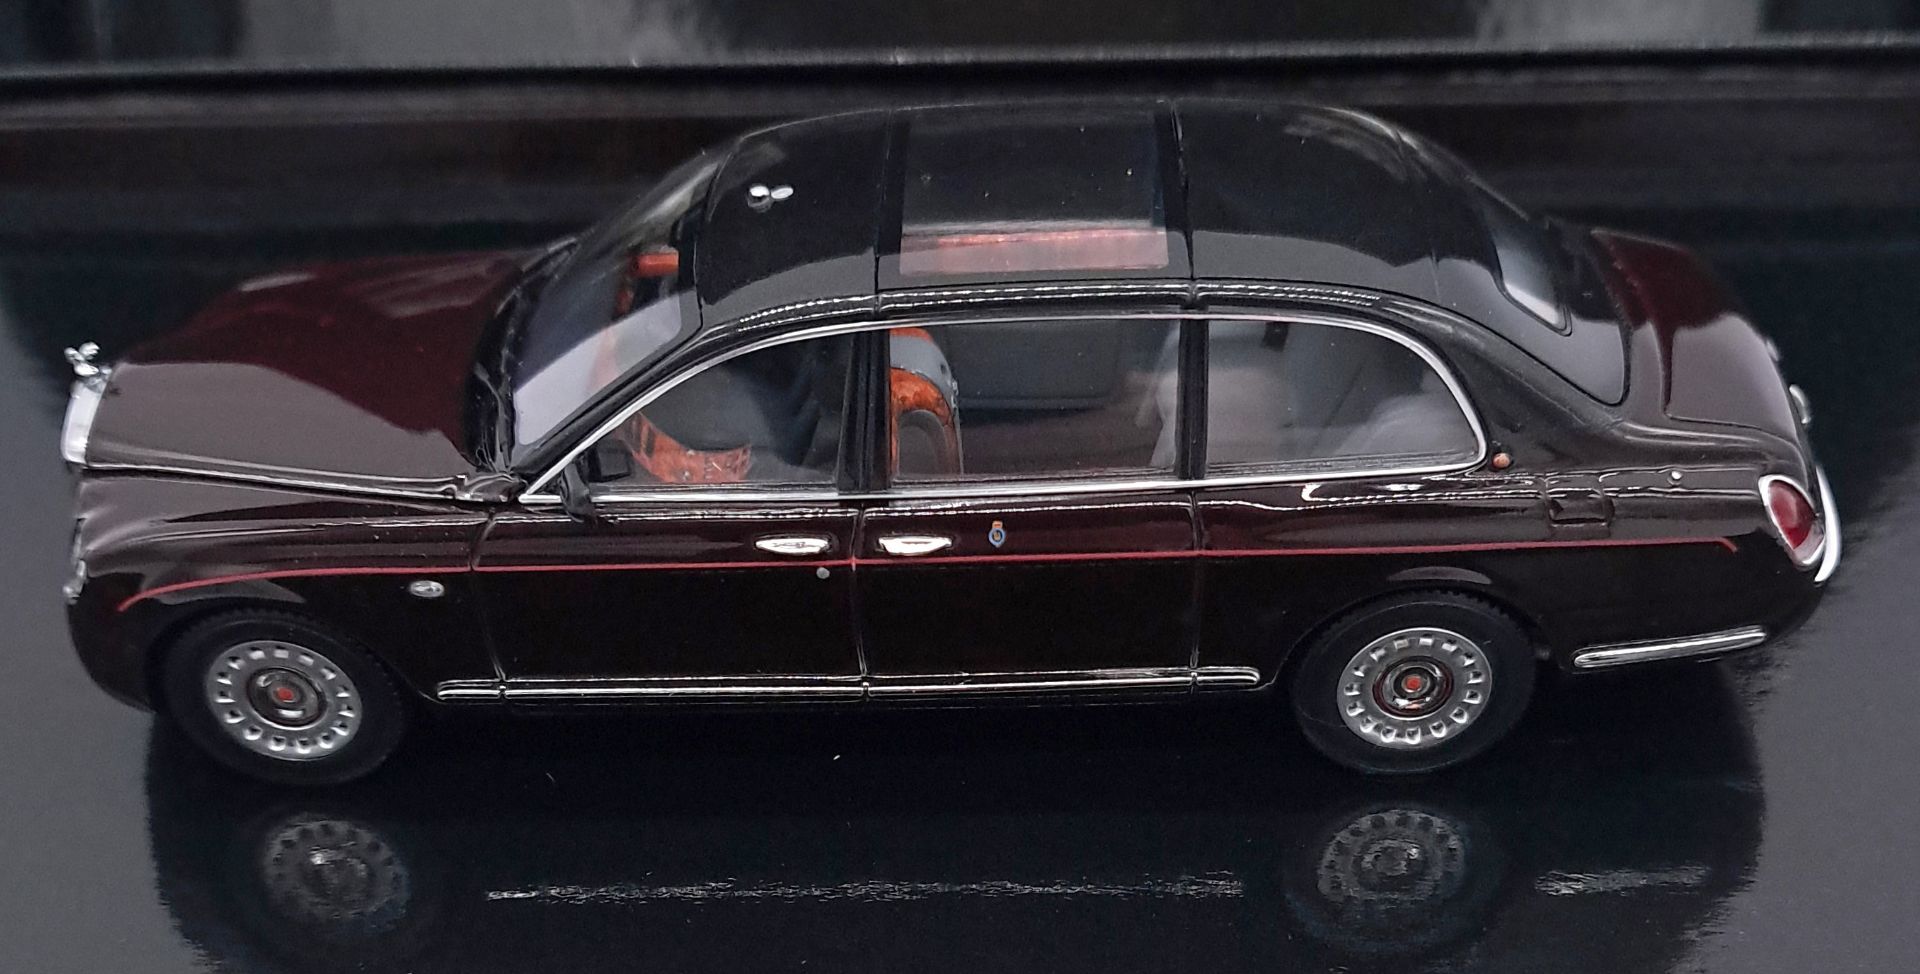 Minichamps 1/43rd scale Bentley State Limousine - Image 2 of 6